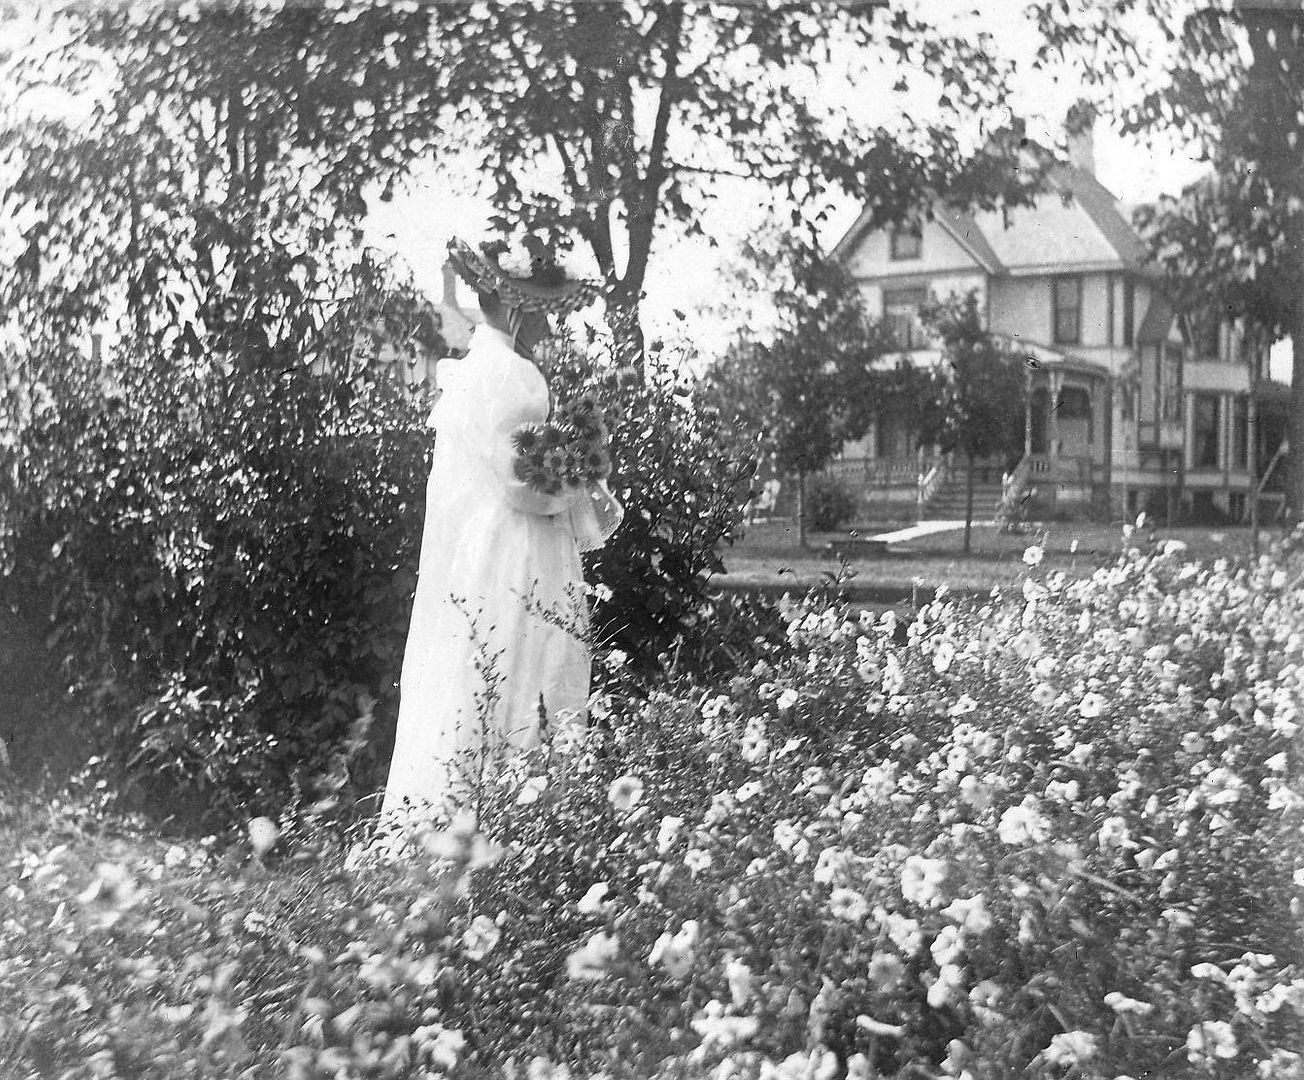 Happier days at the Fargo Mansion: Addie stands  amongst a bower of flowers.